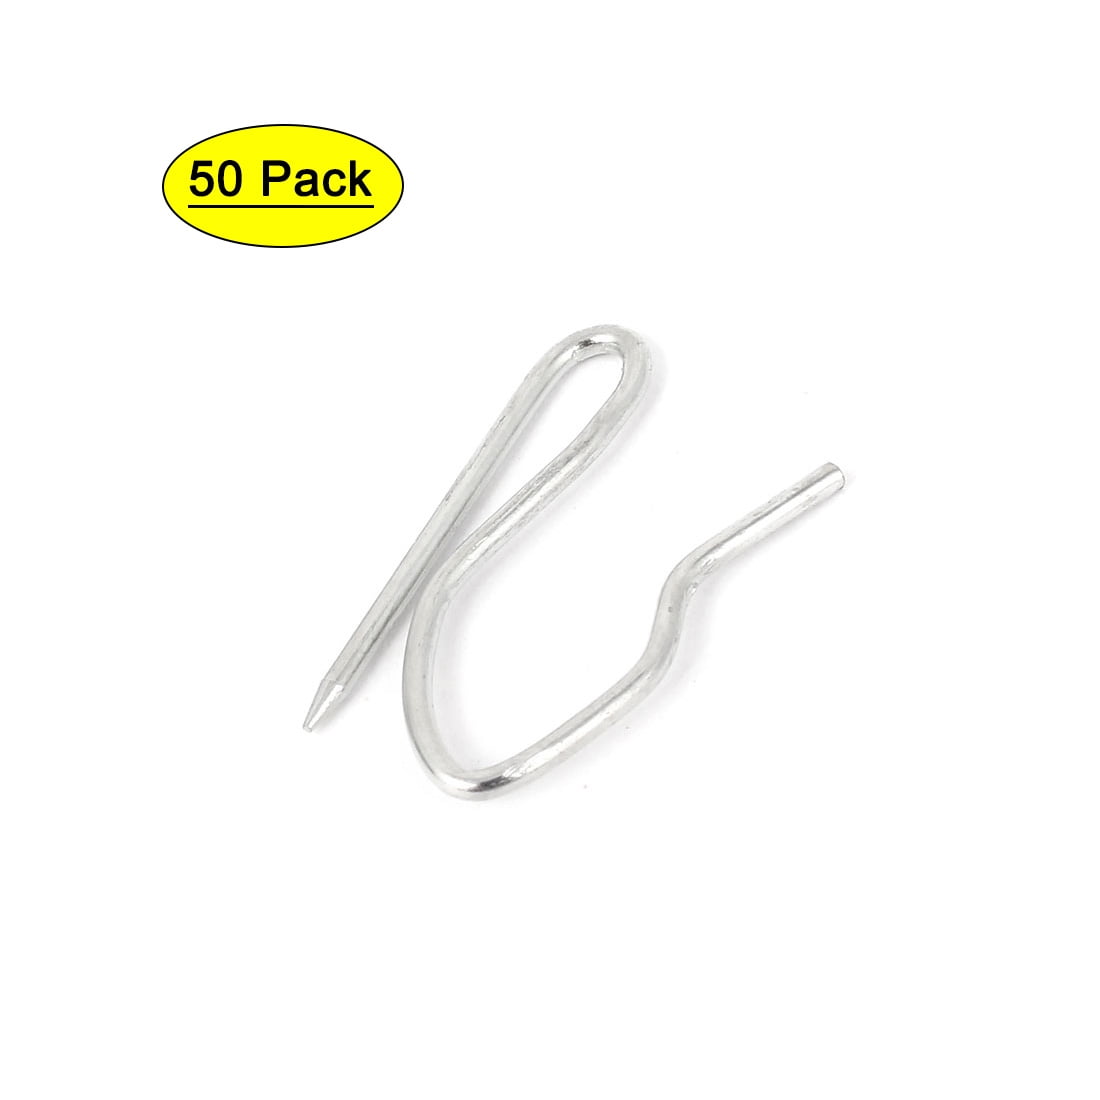 2.6 inch Durable Silver Metal Drapery Hooks Curtain Tape Hanging Clips 20-Pack 